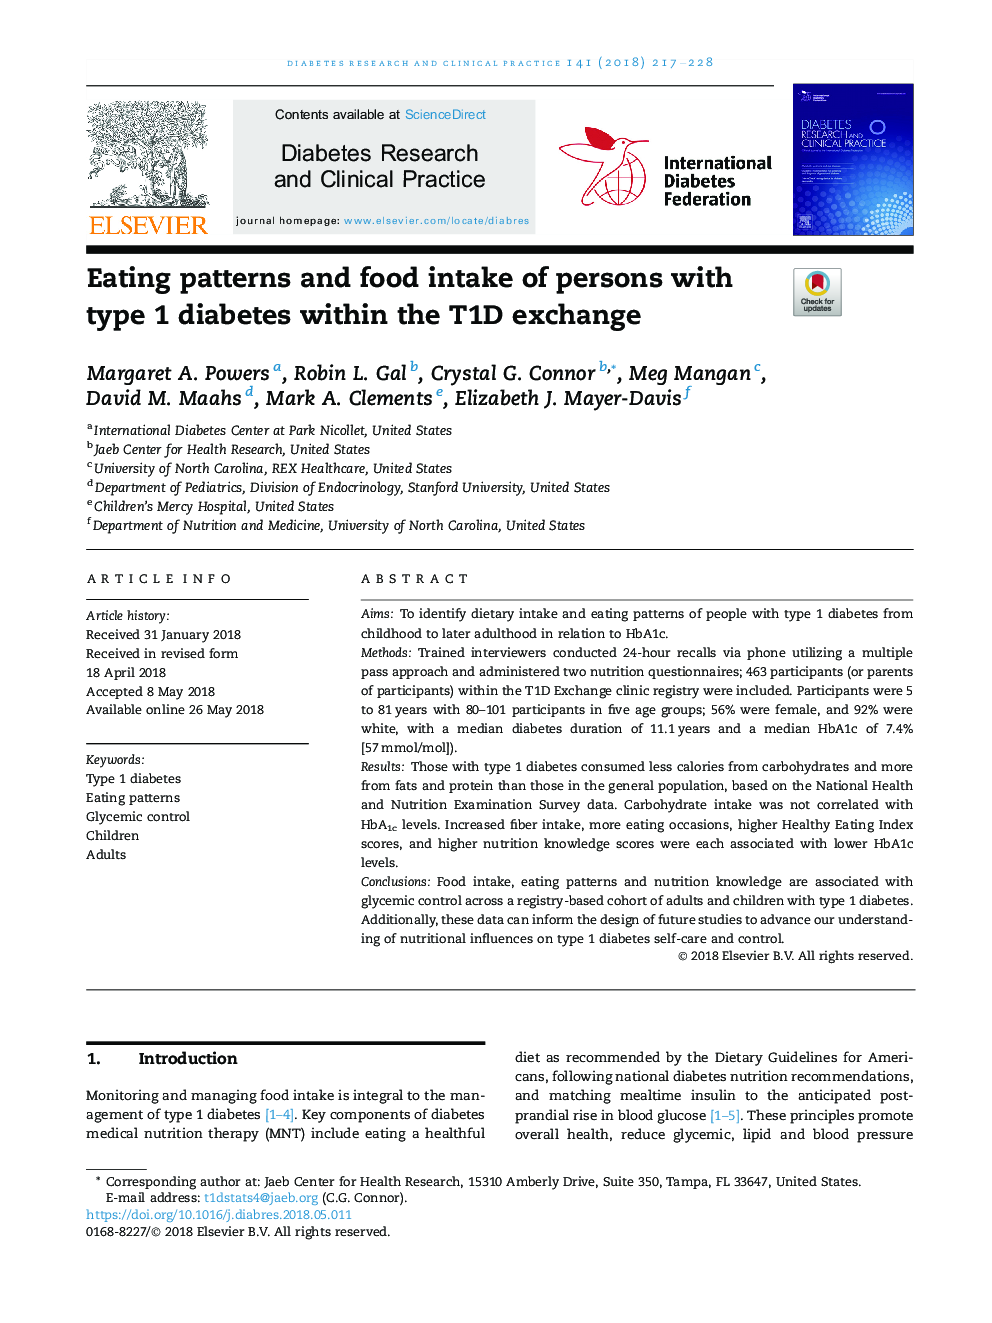 Eating patterns and food intake of persons with type 1 diabetes within the T1D exchange